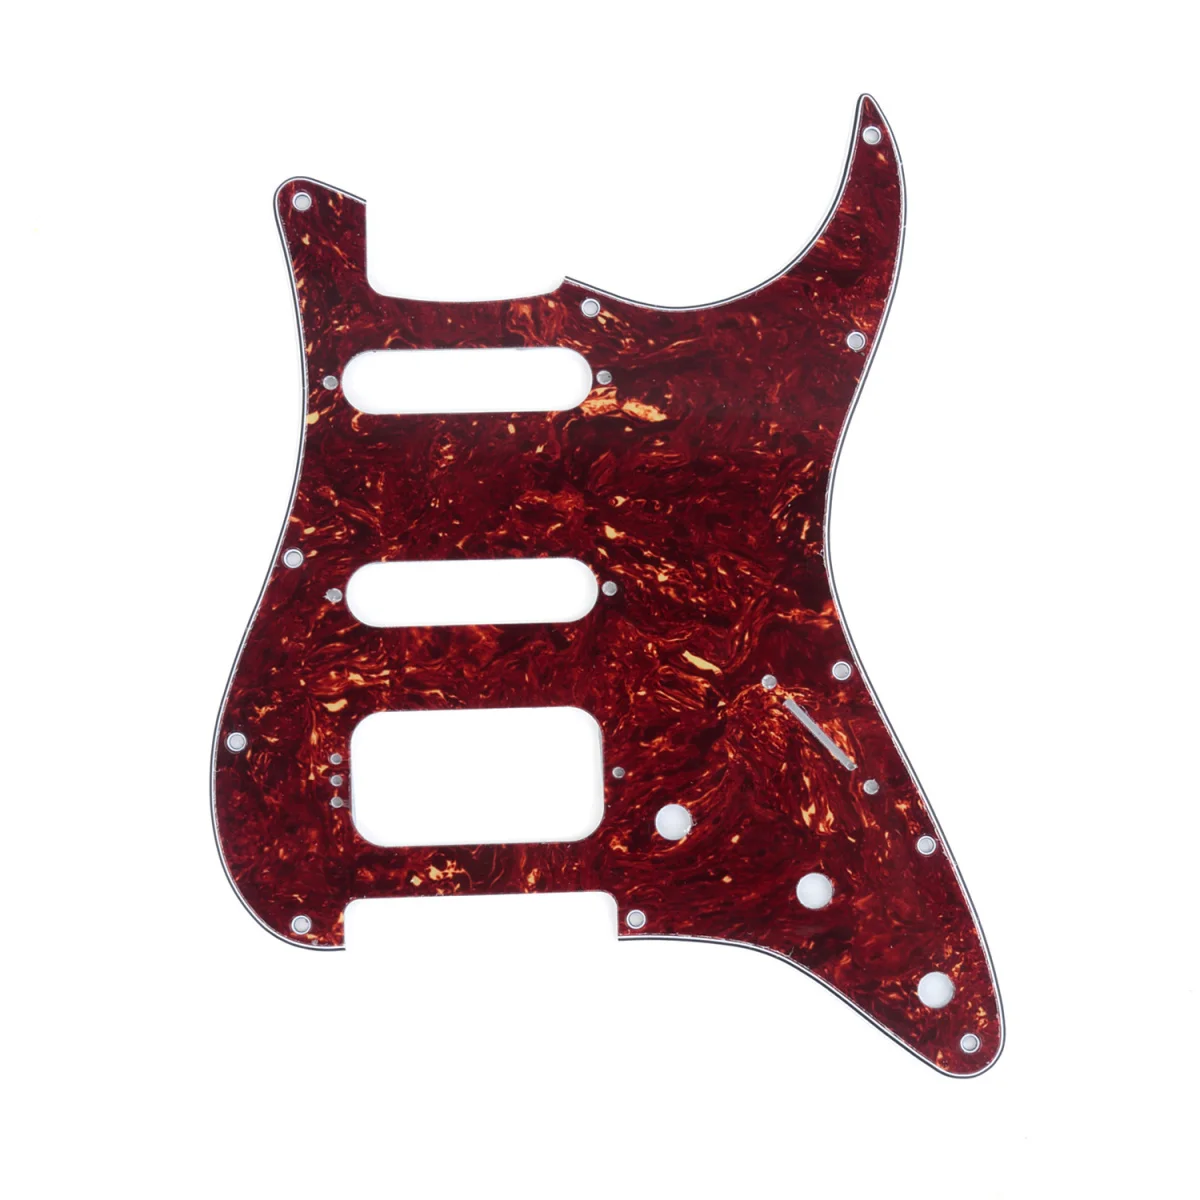 

Musiclily Pro 11-Hole Round Corner HSS Guitar Pickguard for USA/Mexican Strat 4-screw Humbucking Pickup, 4Ply Vintage Tortoise